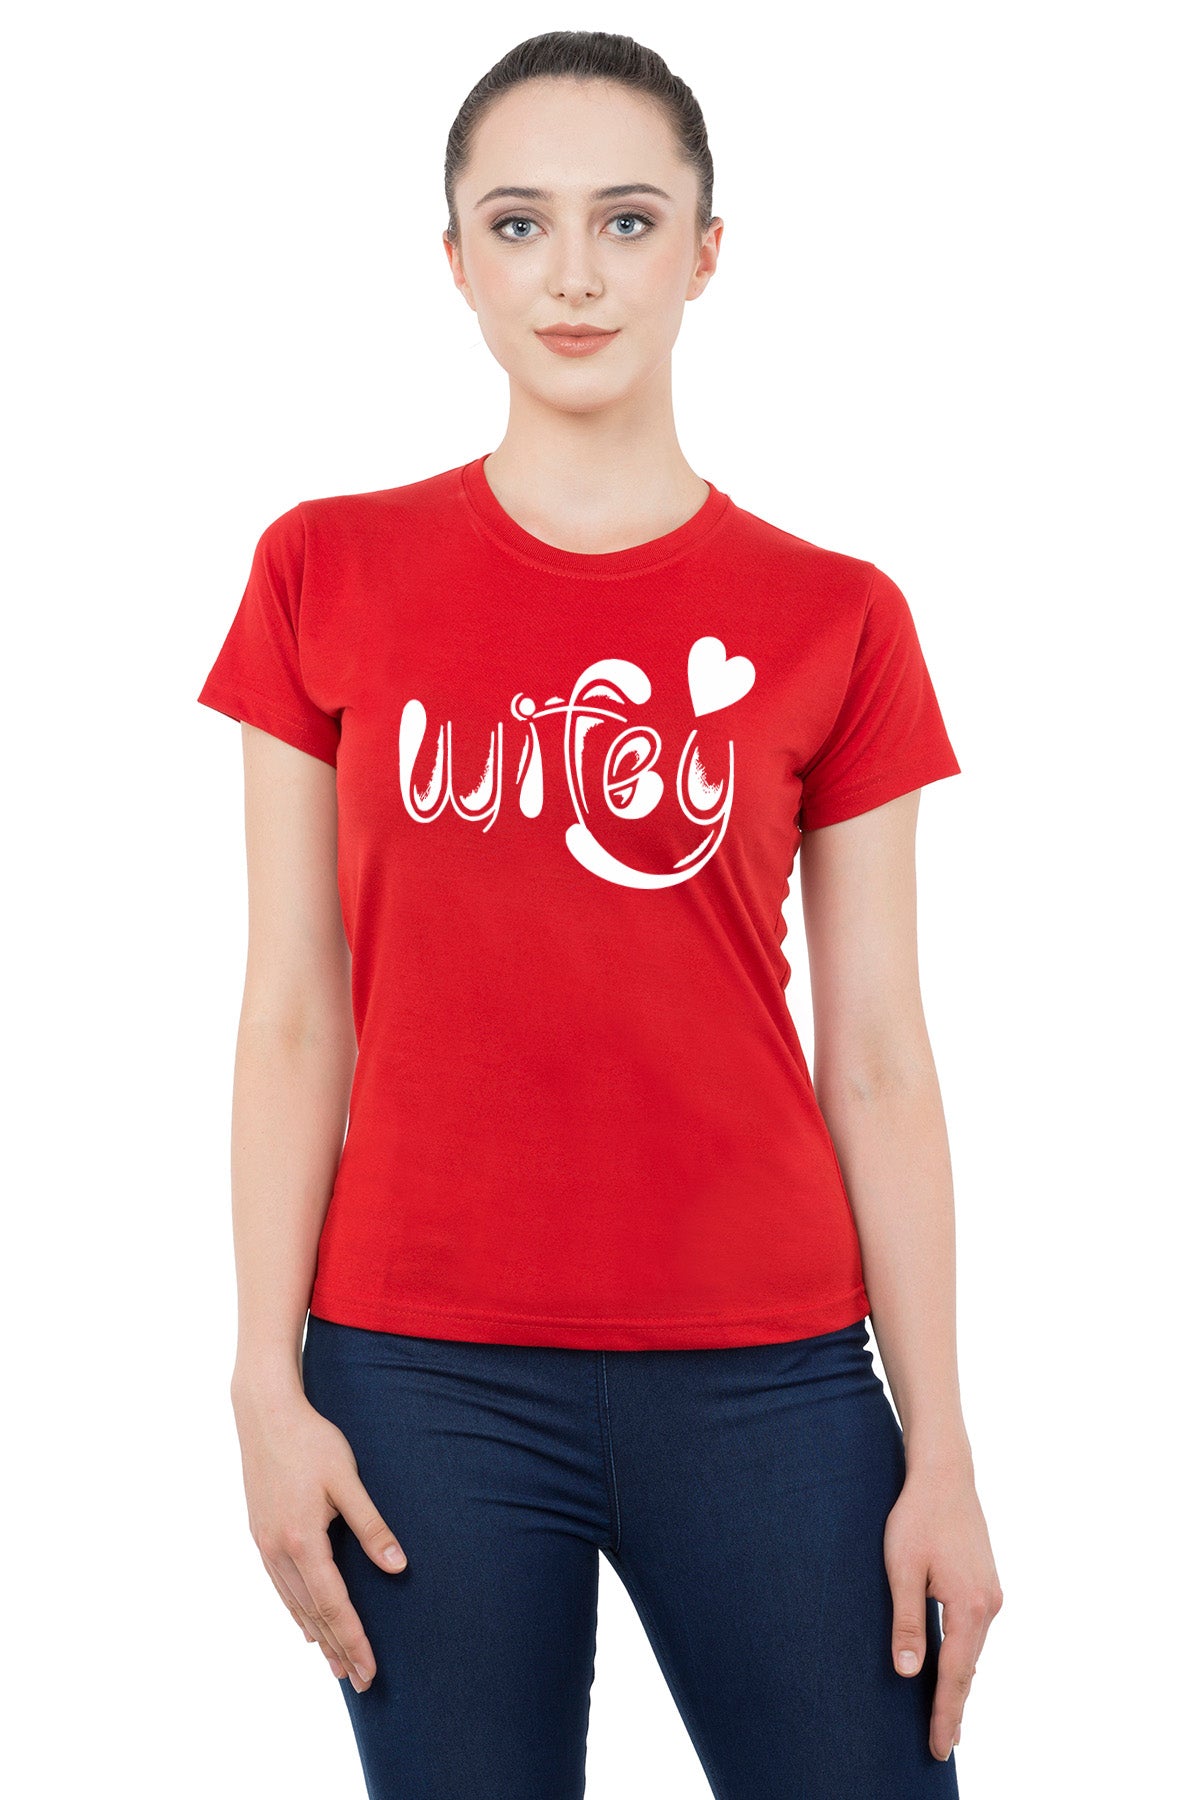 Hubby Wifey matching Couple T shirts- Red